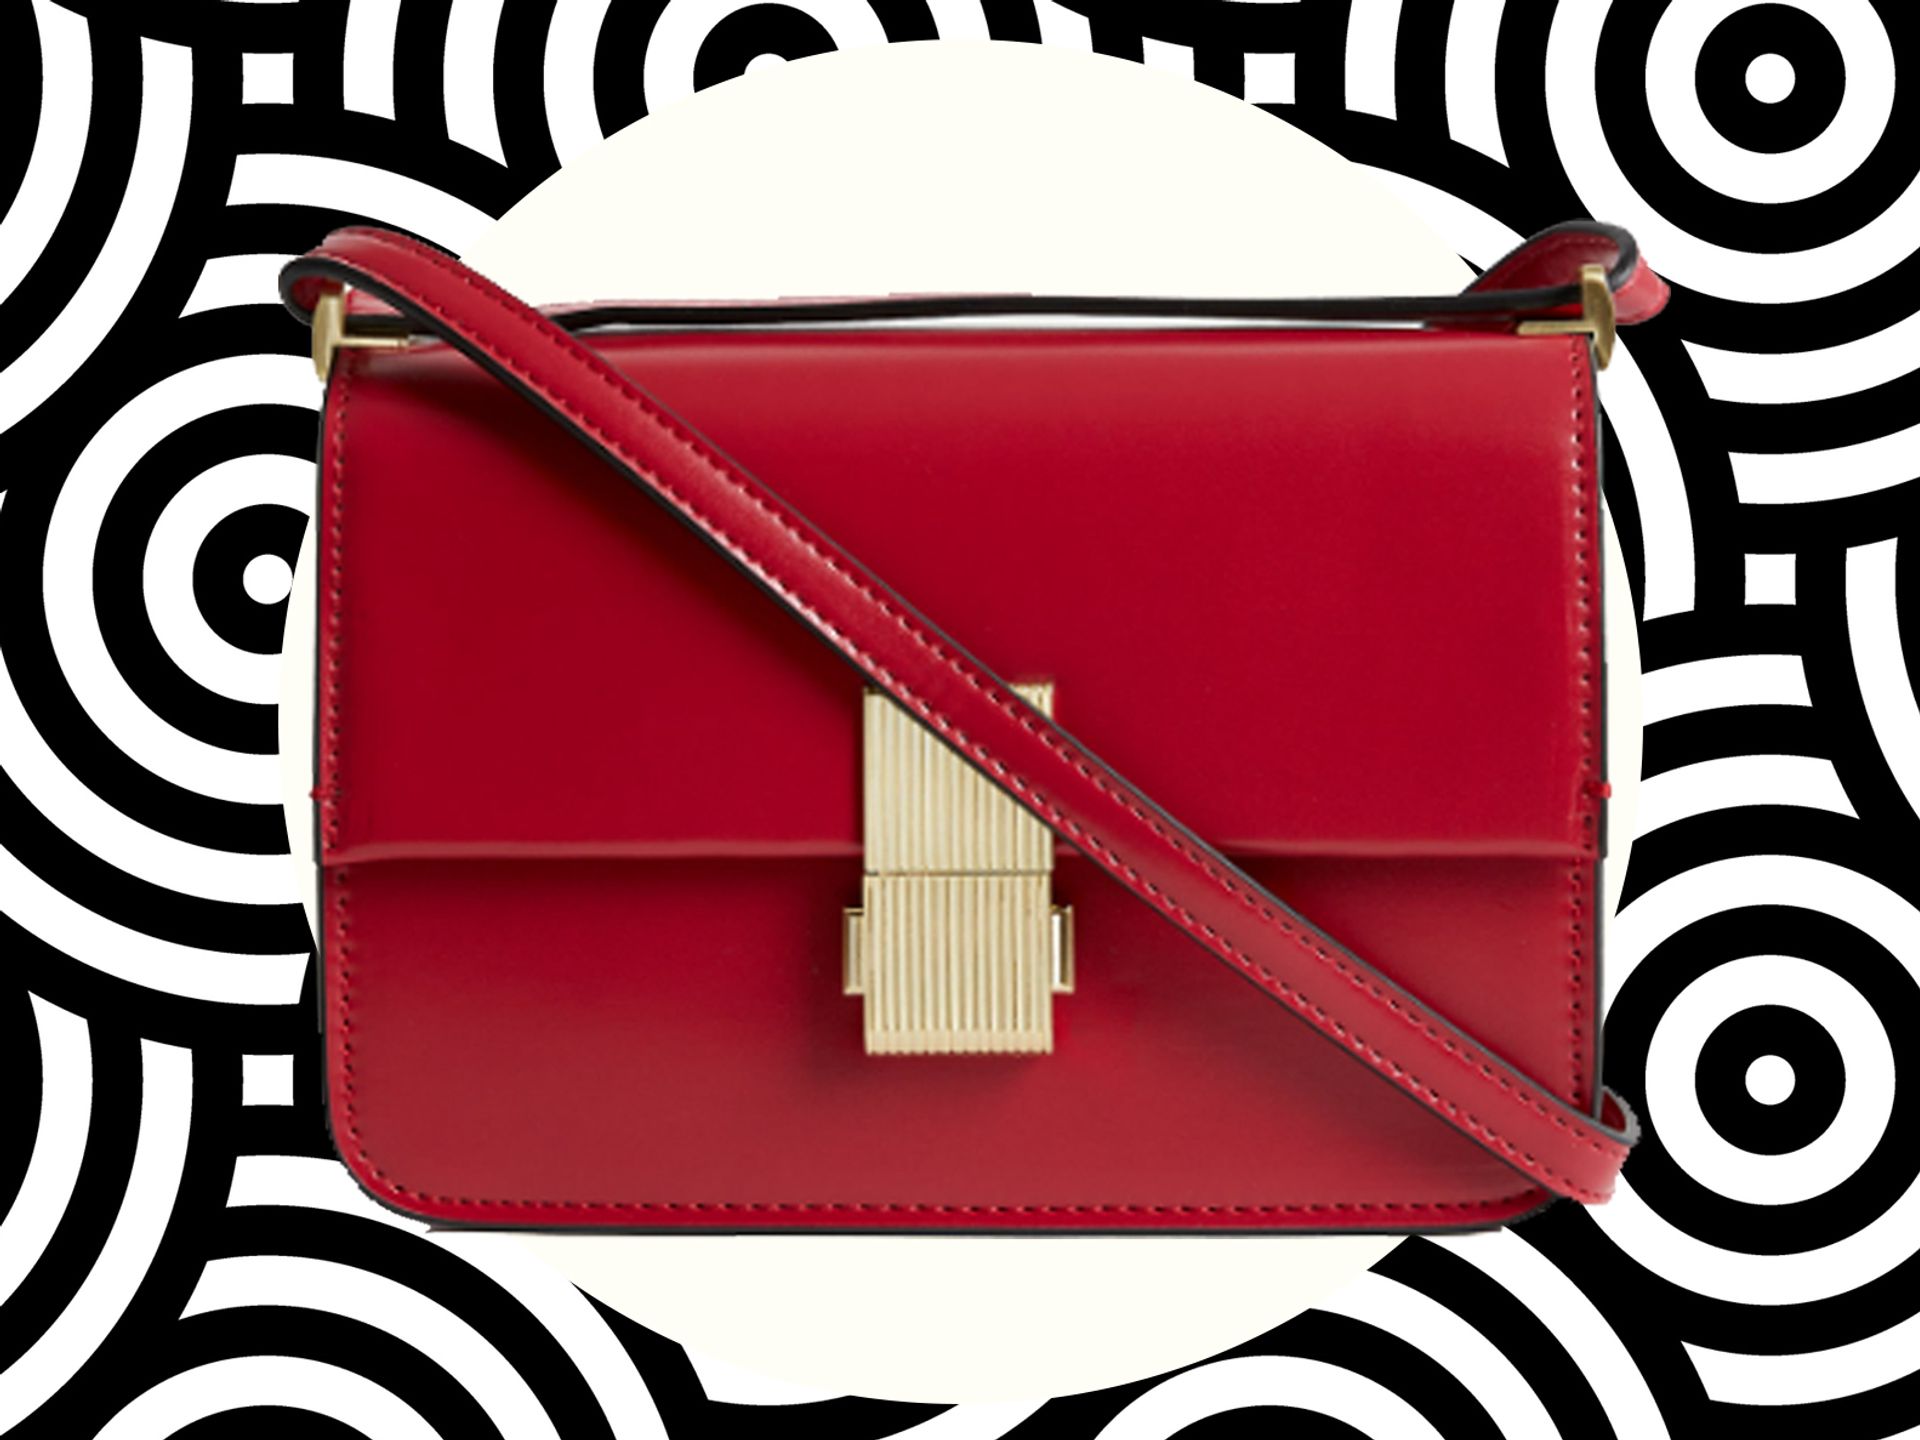 The Celine Box Bag is an elegant classic and celebrity favorite